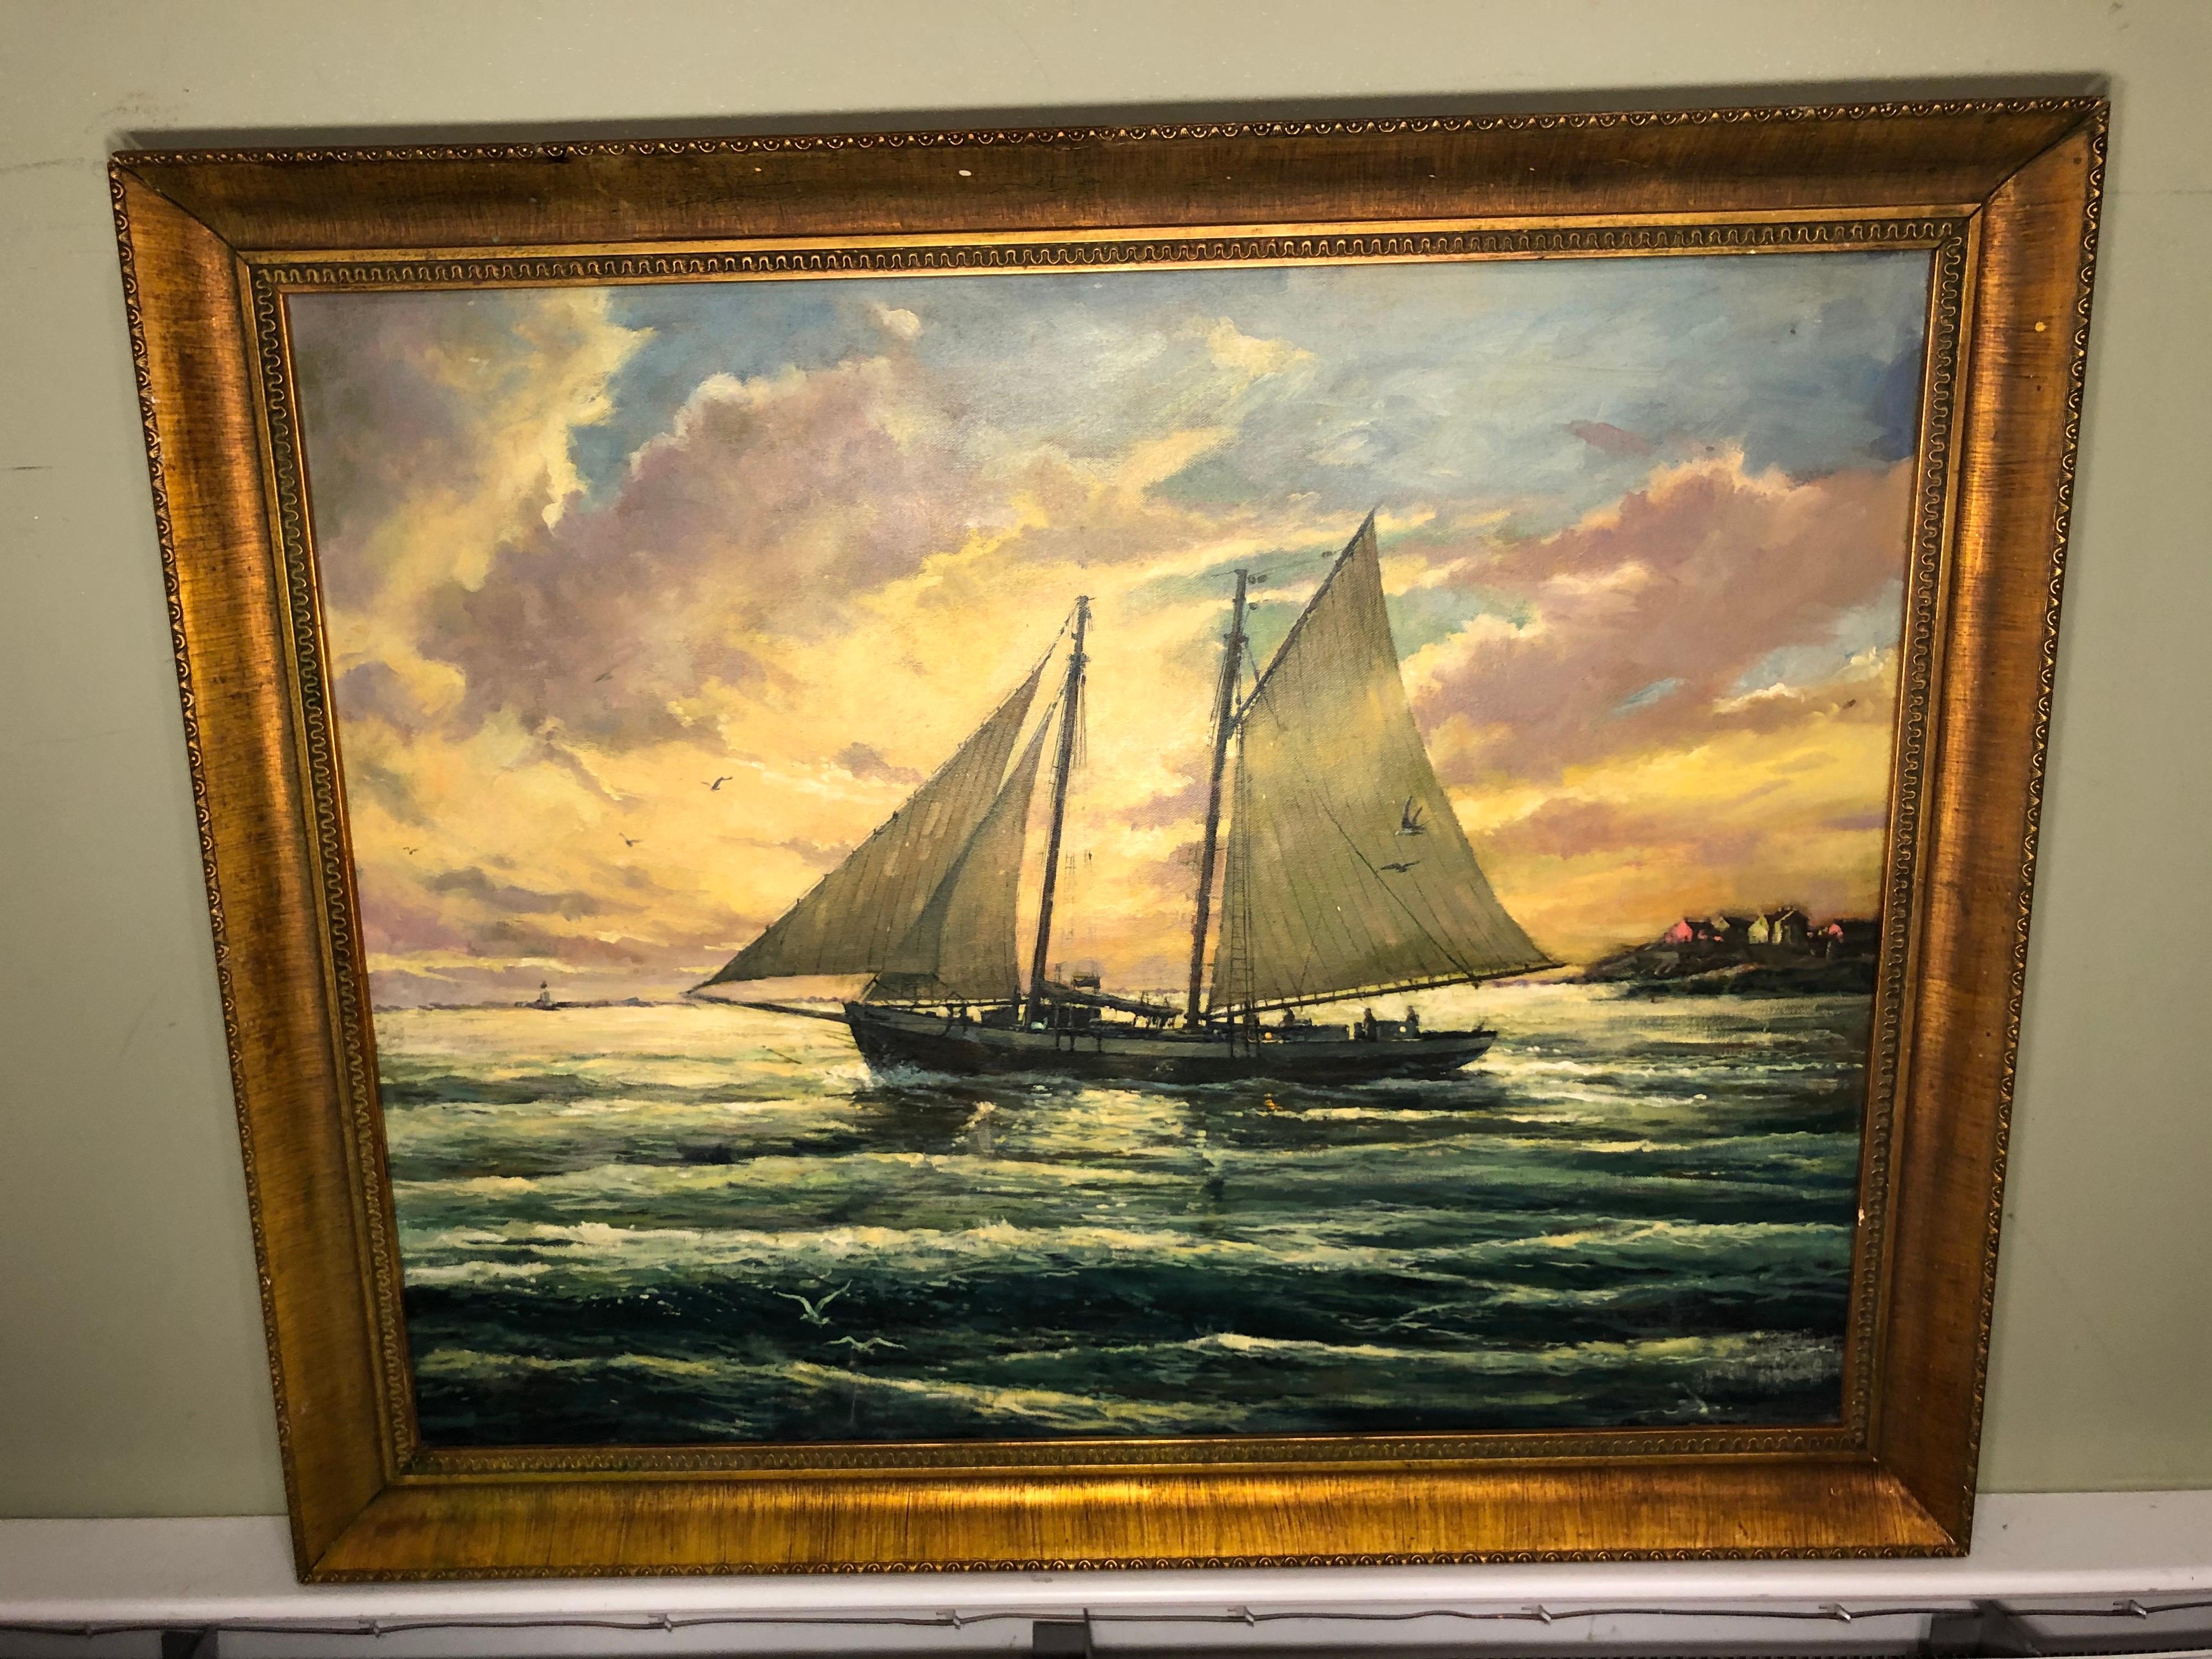 Victor Olsen sunset scene of sailboats oil on canvas. Classic nautical scene. Nicely framed.
Victor Olson (1925-2007). Unsigned on front but from his Redding CT family estate.

Mr. Olson attended the Art Career School of New York. He was a